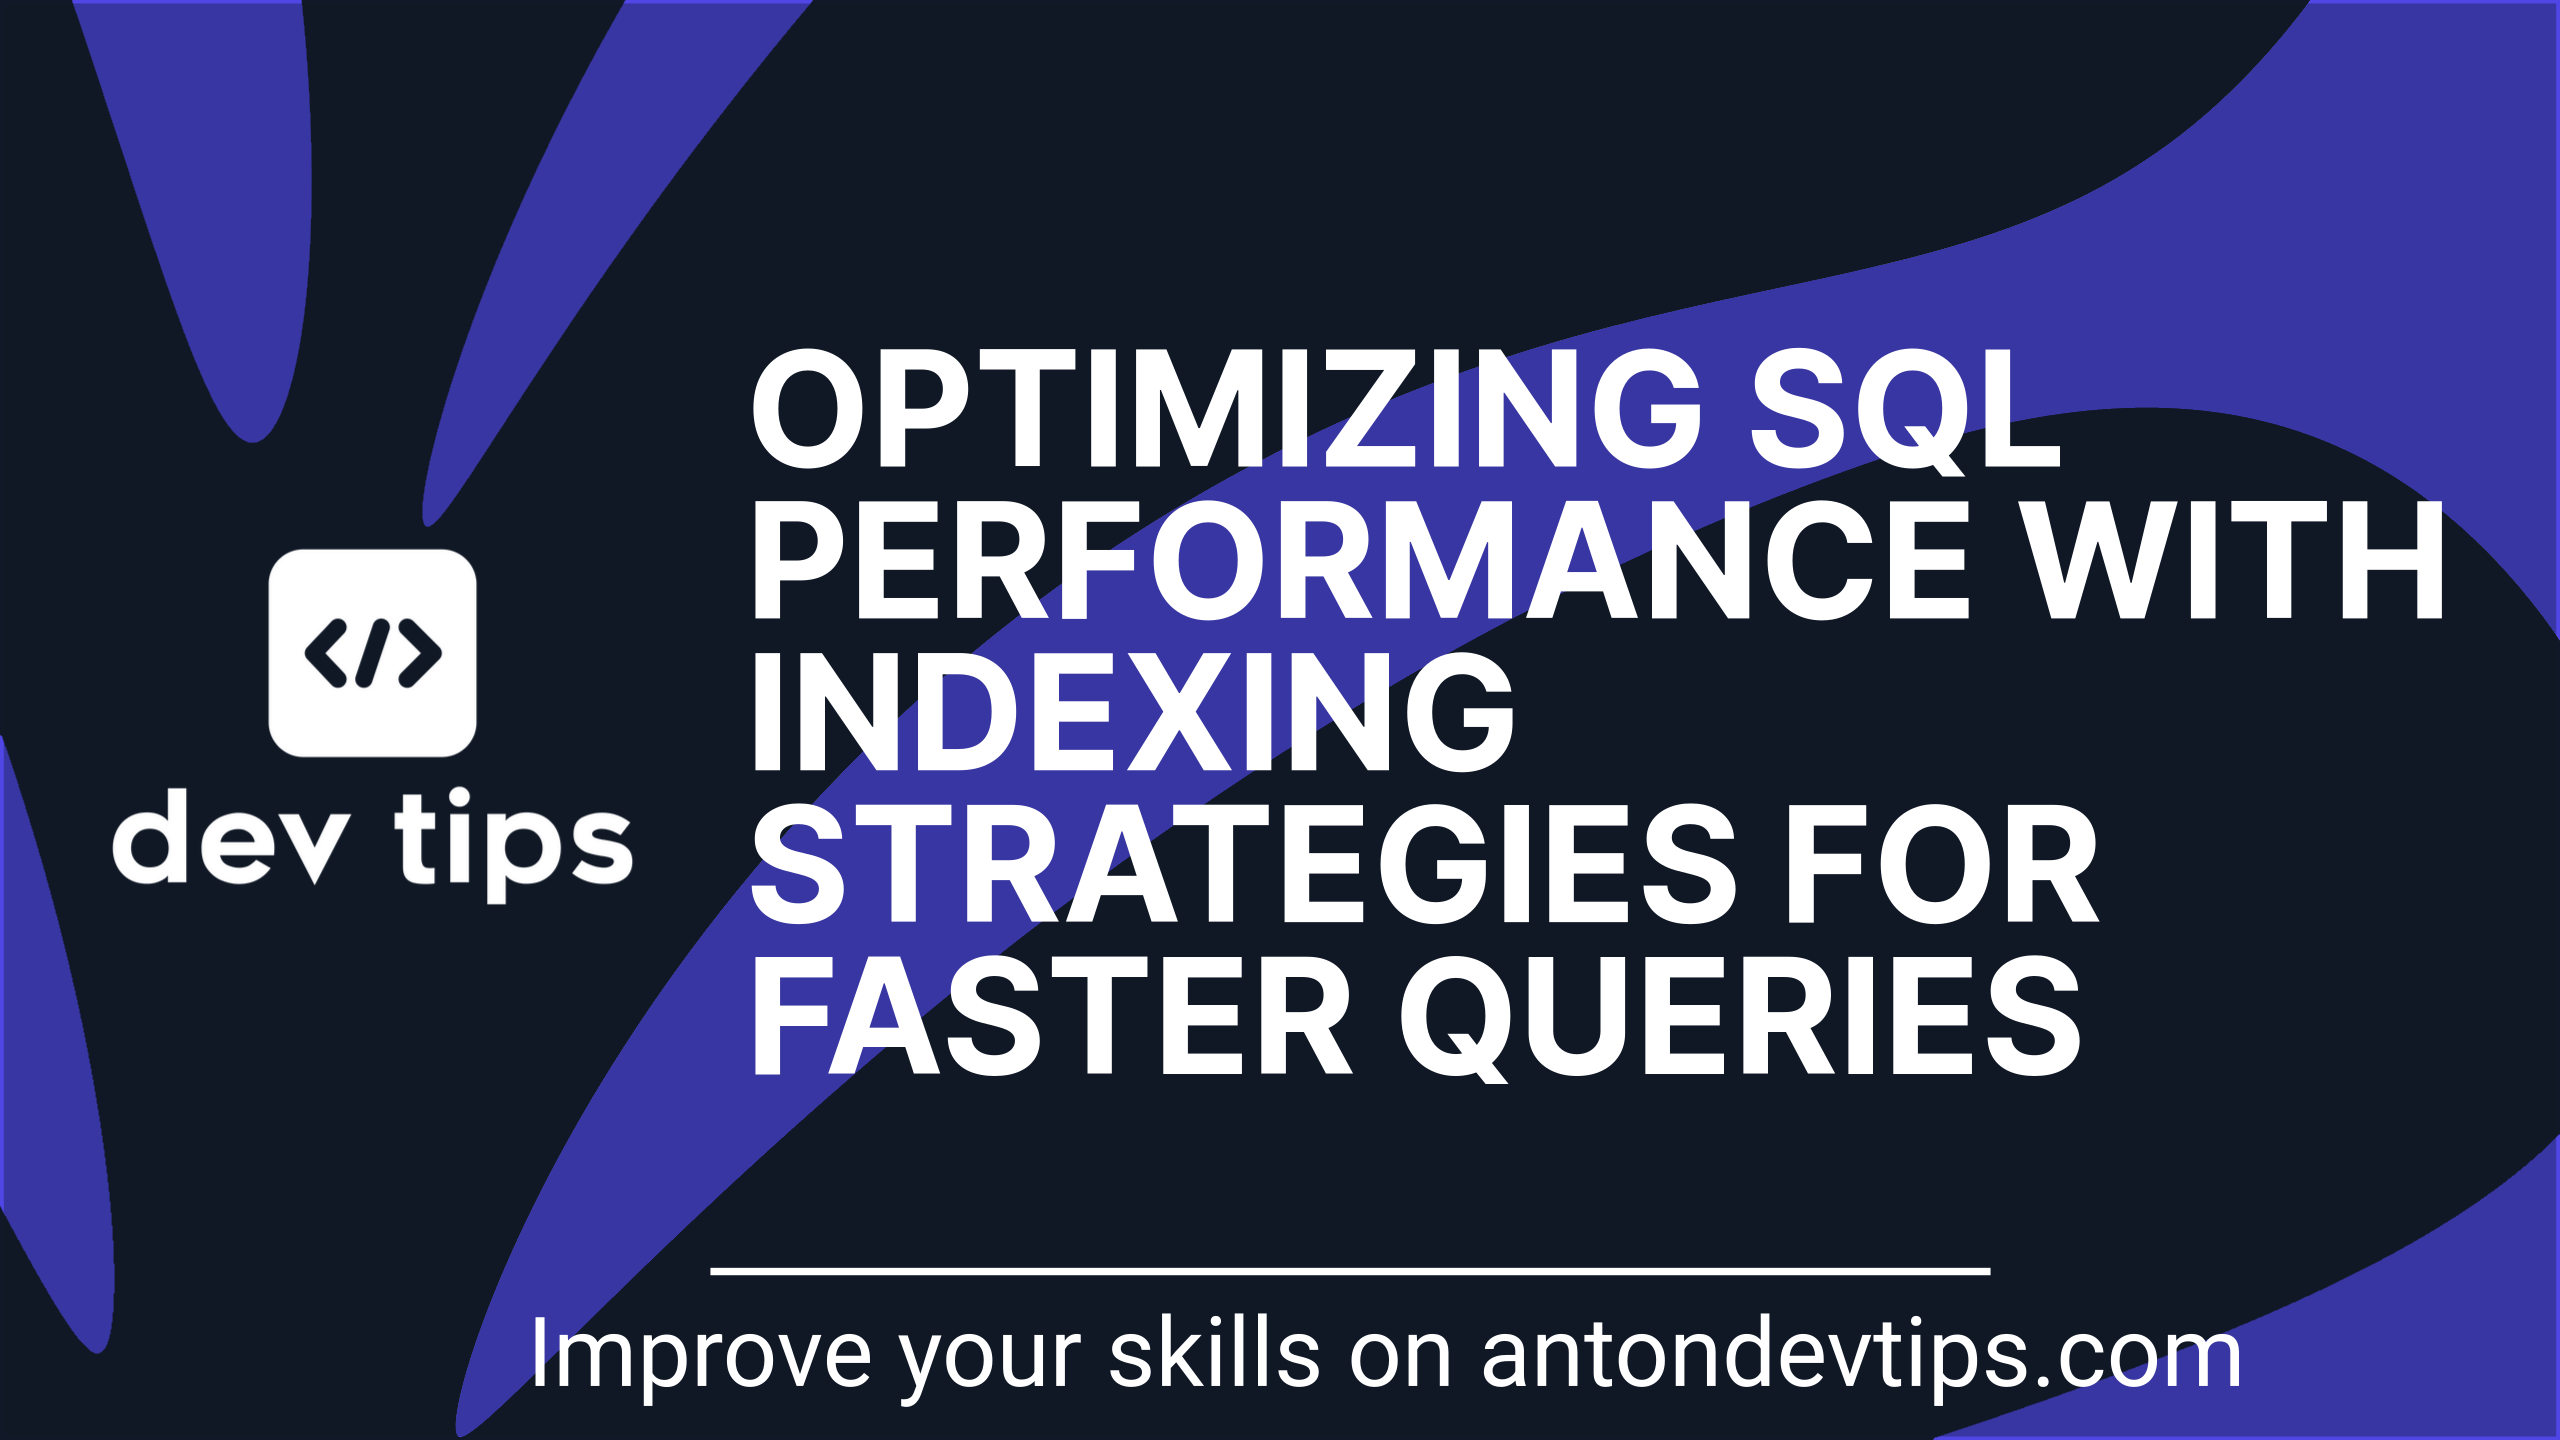 Optimizing SQL Performance with Indexing Strategies for Faster Queries